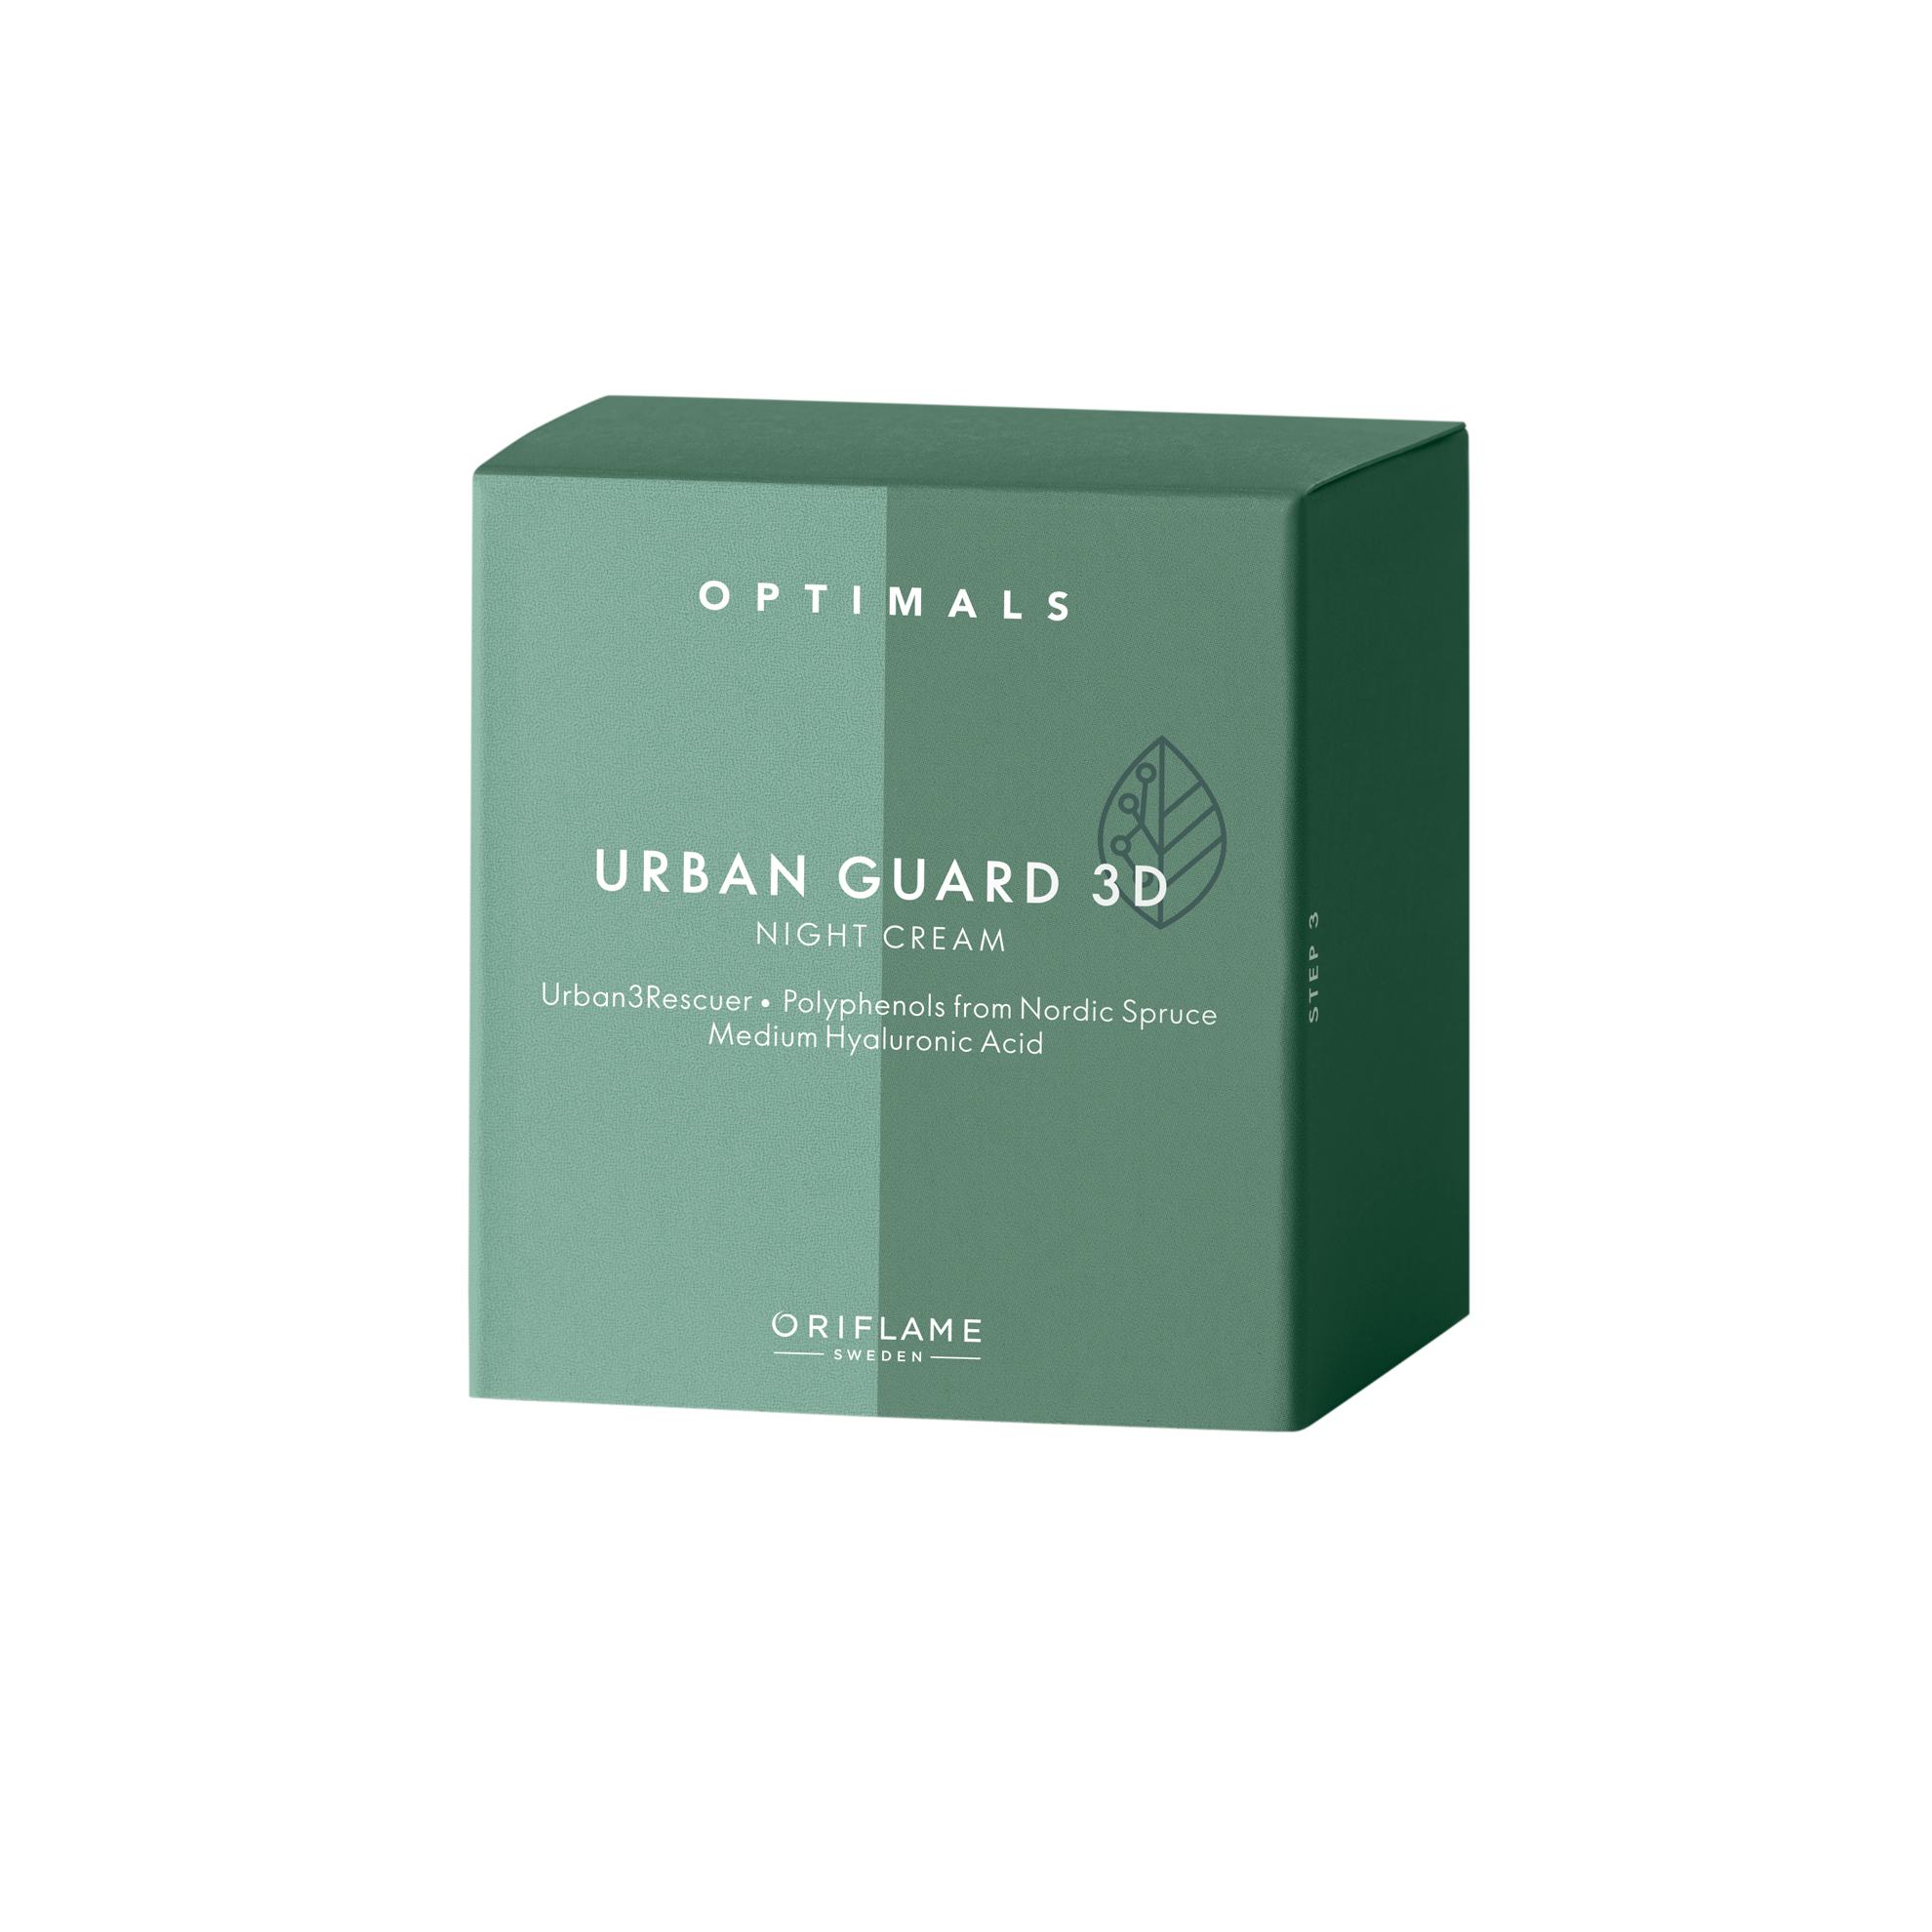 https://media-cdn.oriflame.com/productImage?externalMediaId=product-management-media%2fProducts%2f44260%2fMN%2f44260_1.png&id=15186919&version=1